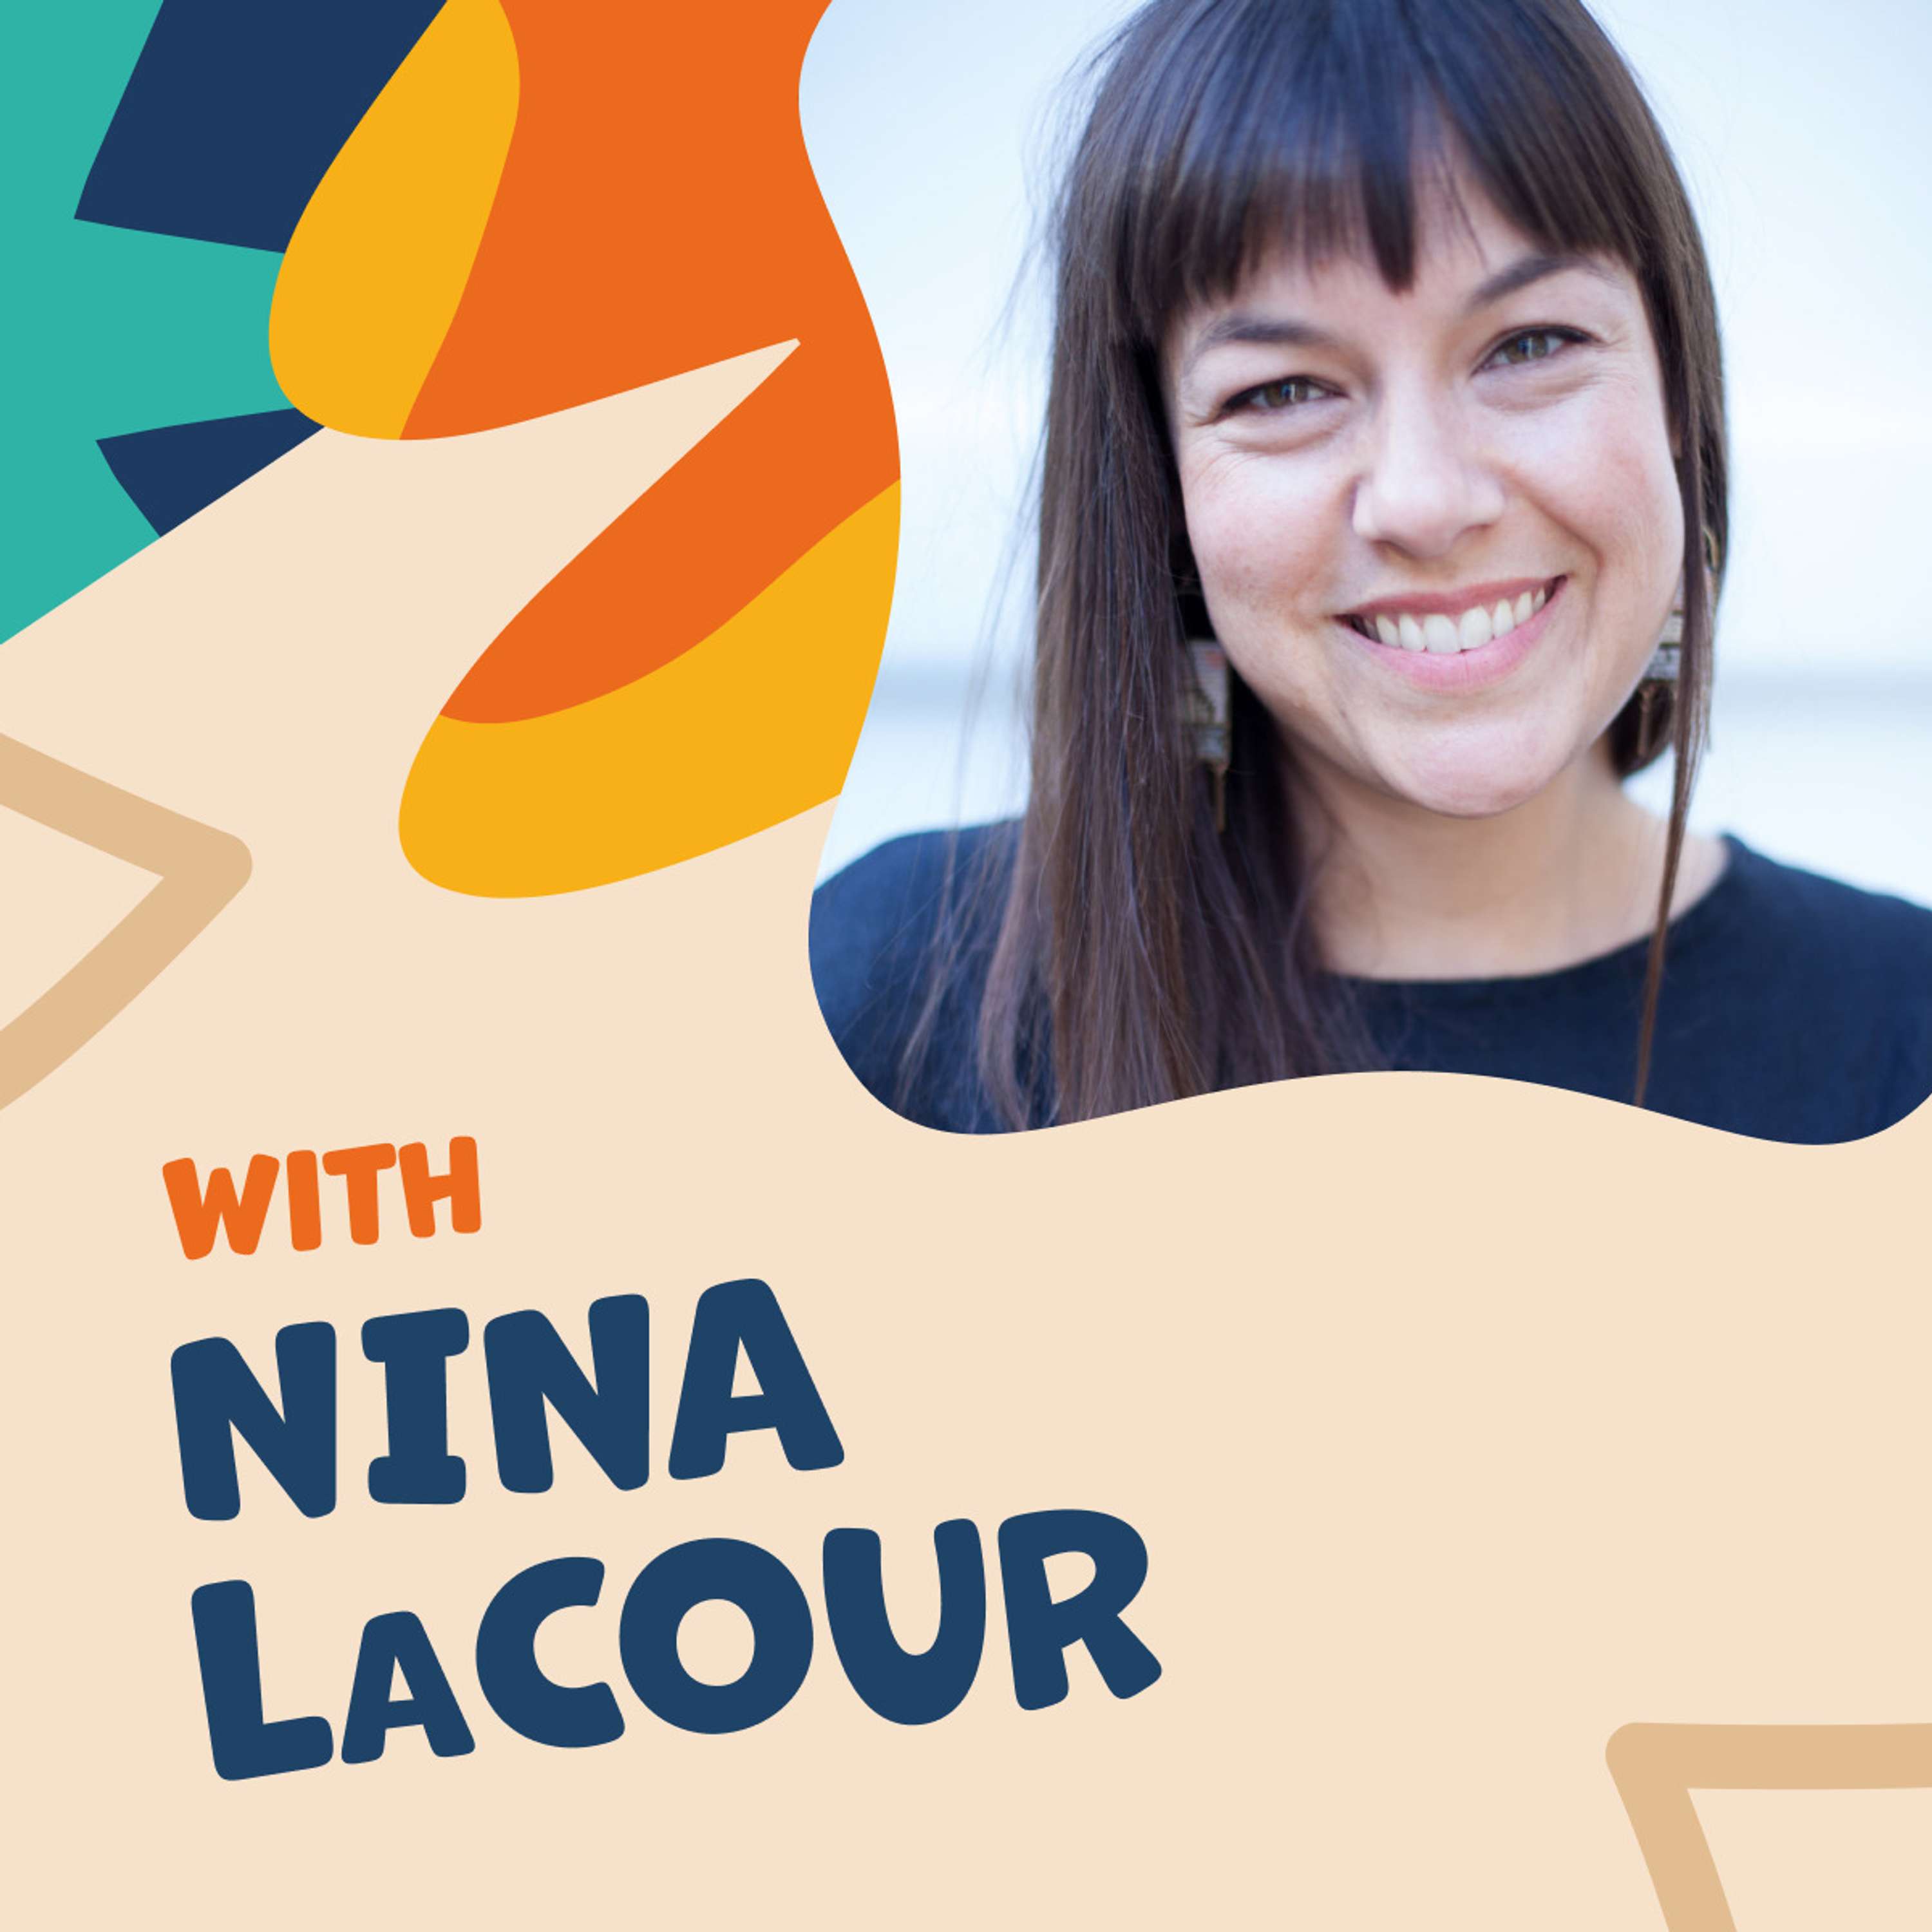 Simple Thing, Felt: Nina LaCour on Unwrapping a Moment